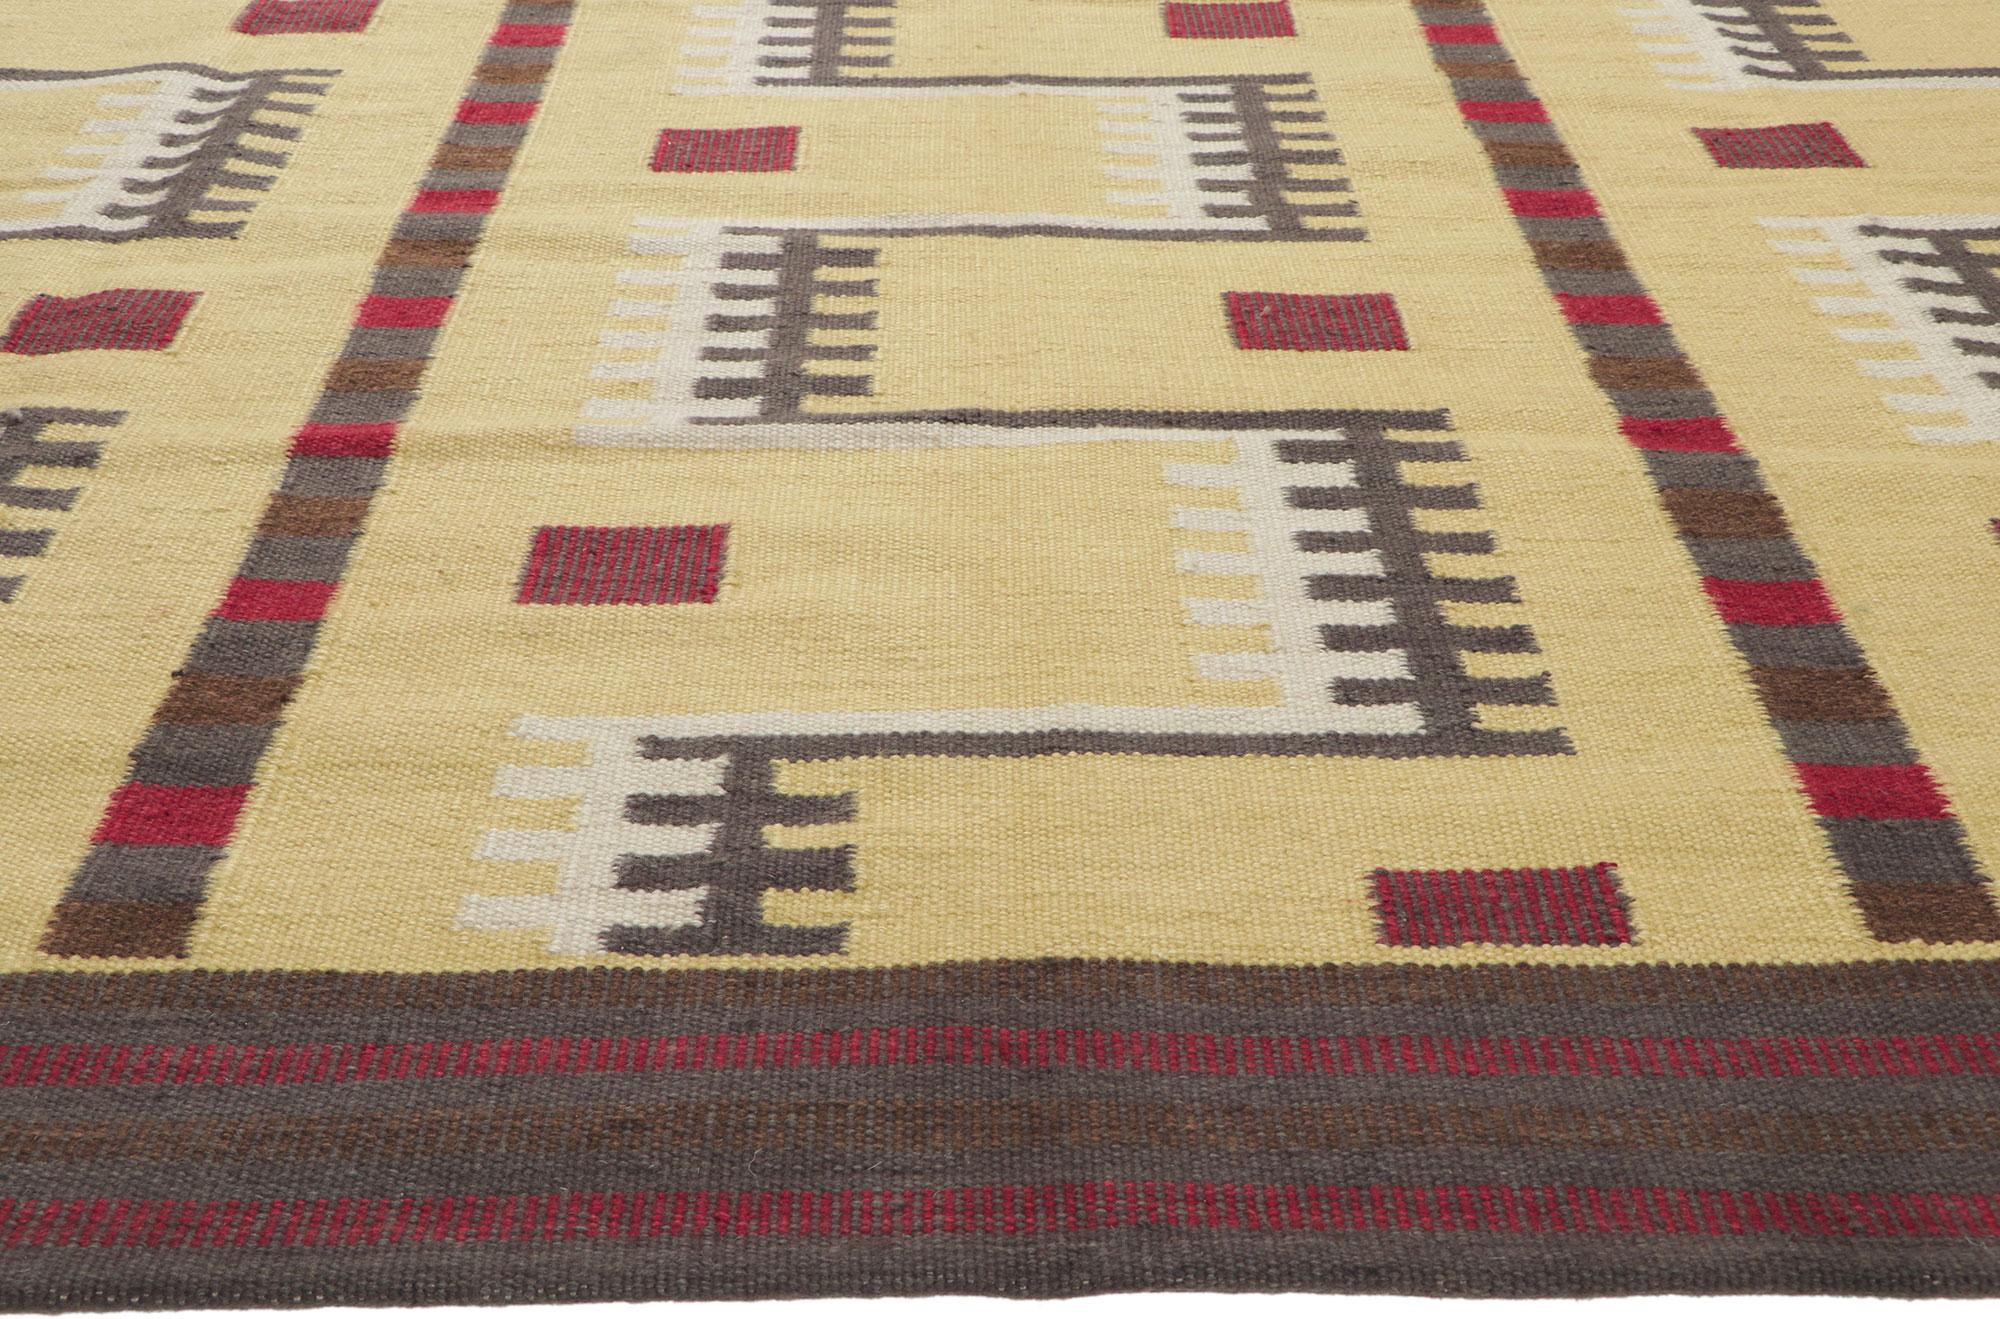 Scandinavian Modern Swedish Inspired Kilim Rug In New Condition For Sale In Dallas, TX